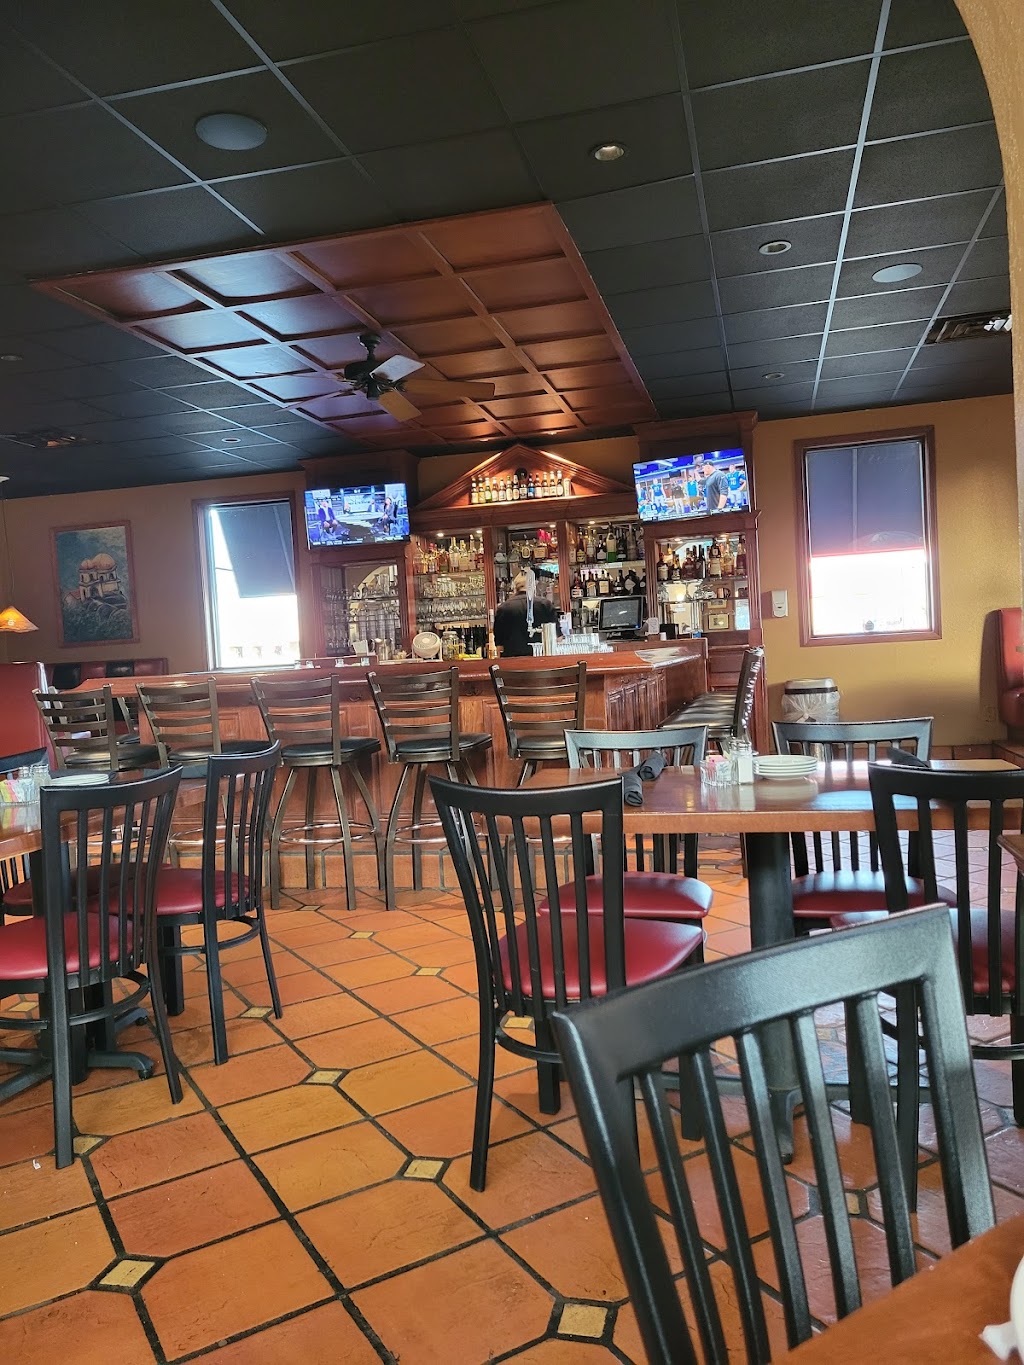 Casa Grille | 411 E Dupont Rd, Fort Wayne, IN 46825, USA | Phone: (260) 490-4745